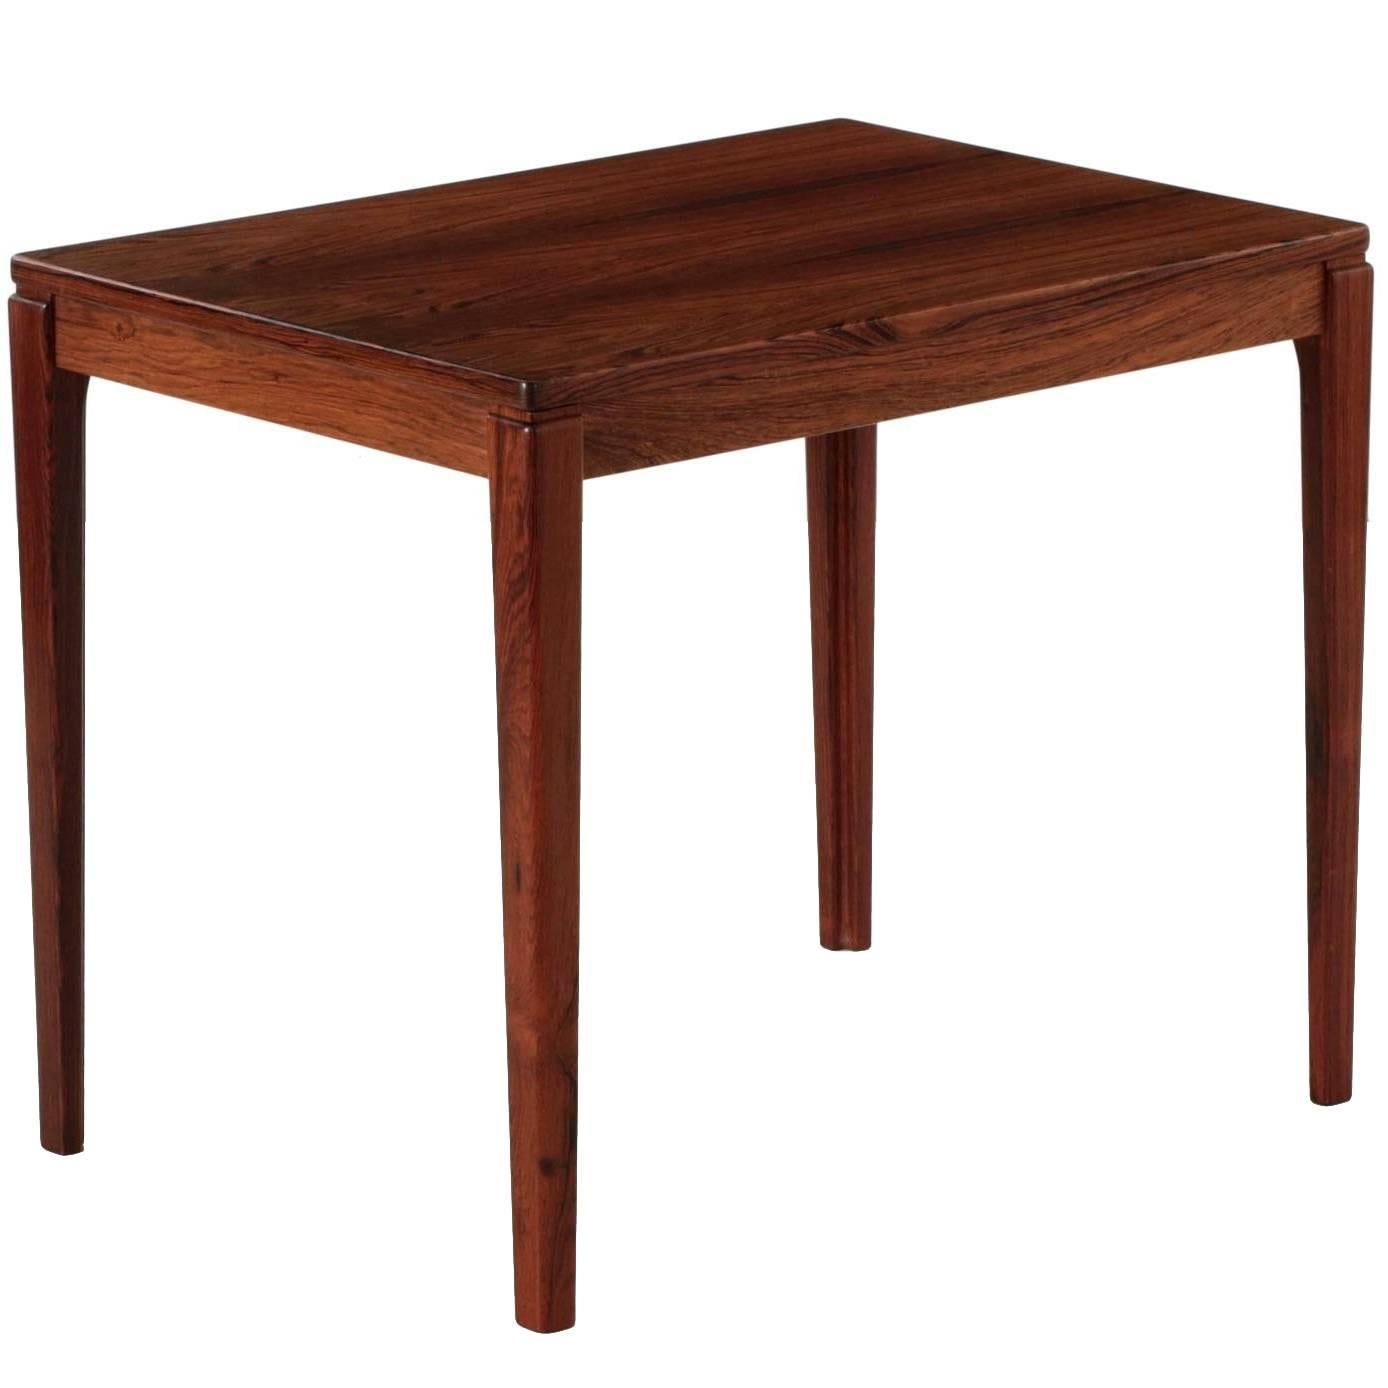 Swedish Mid-Century Modern Rosewood Side Table by Ulferts Møbler, circa 1960s